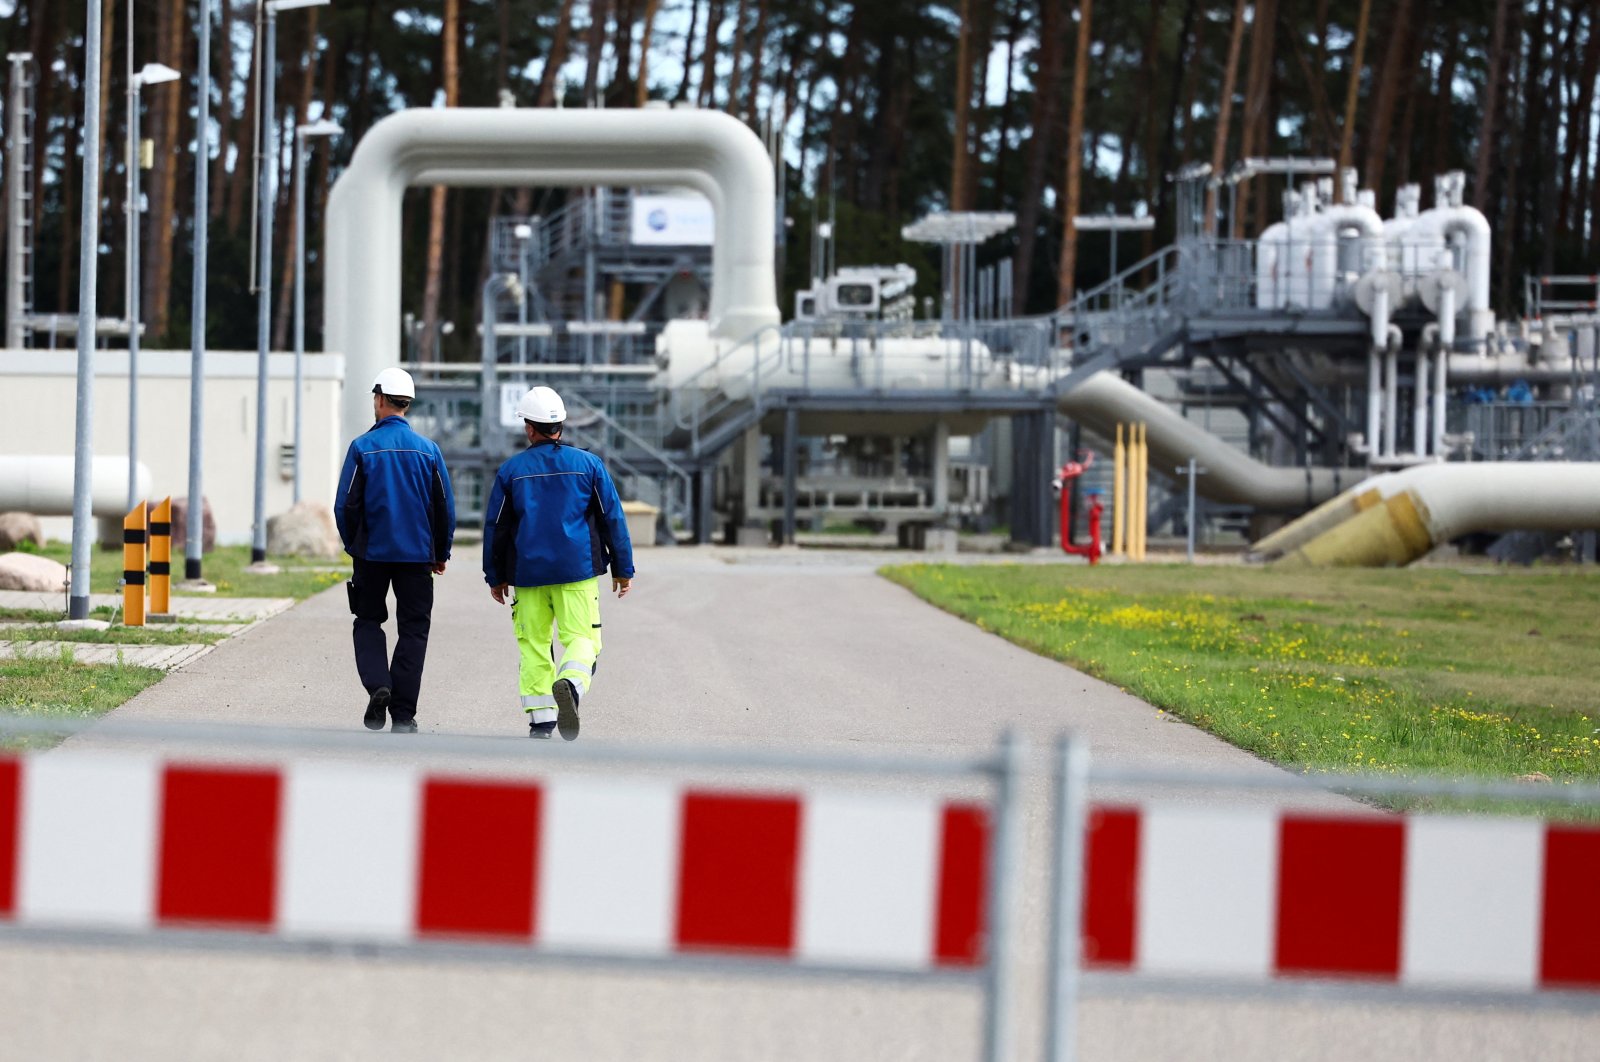 A view of the Nord Stream 1 Baltic Sea pipeline and transfer station of the Baltic Sea Pipeline Link in the industrial area of Lubmin, Germany, Aug. 30, 2022. (Reuters Photo)